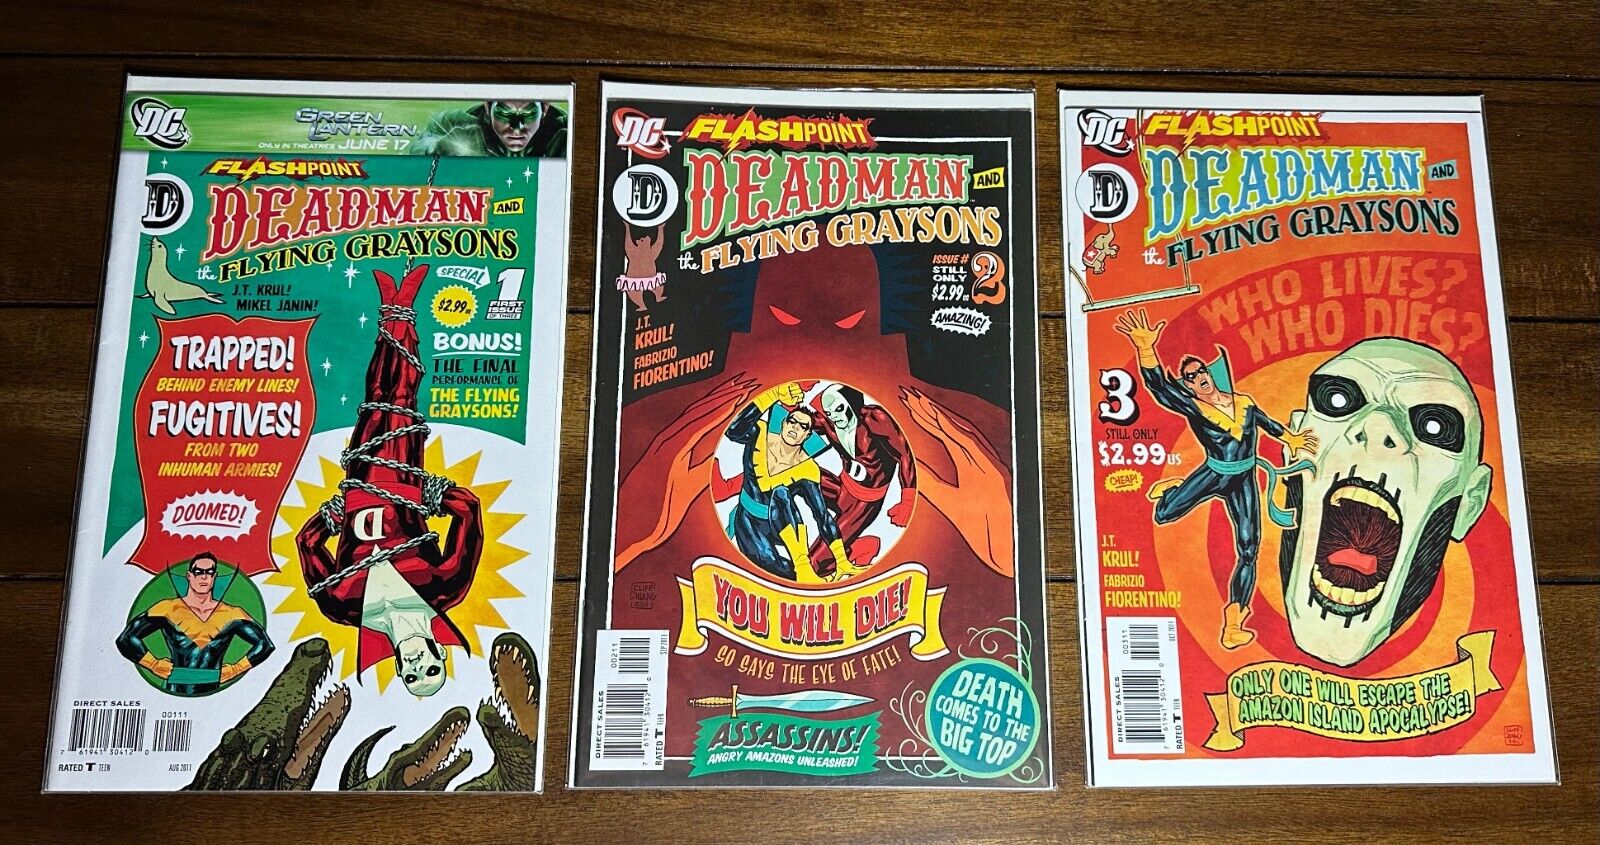 Flashpoint - Deadman & The Flying Graysons - Complete Set Of 3 - DC Comics, 2011